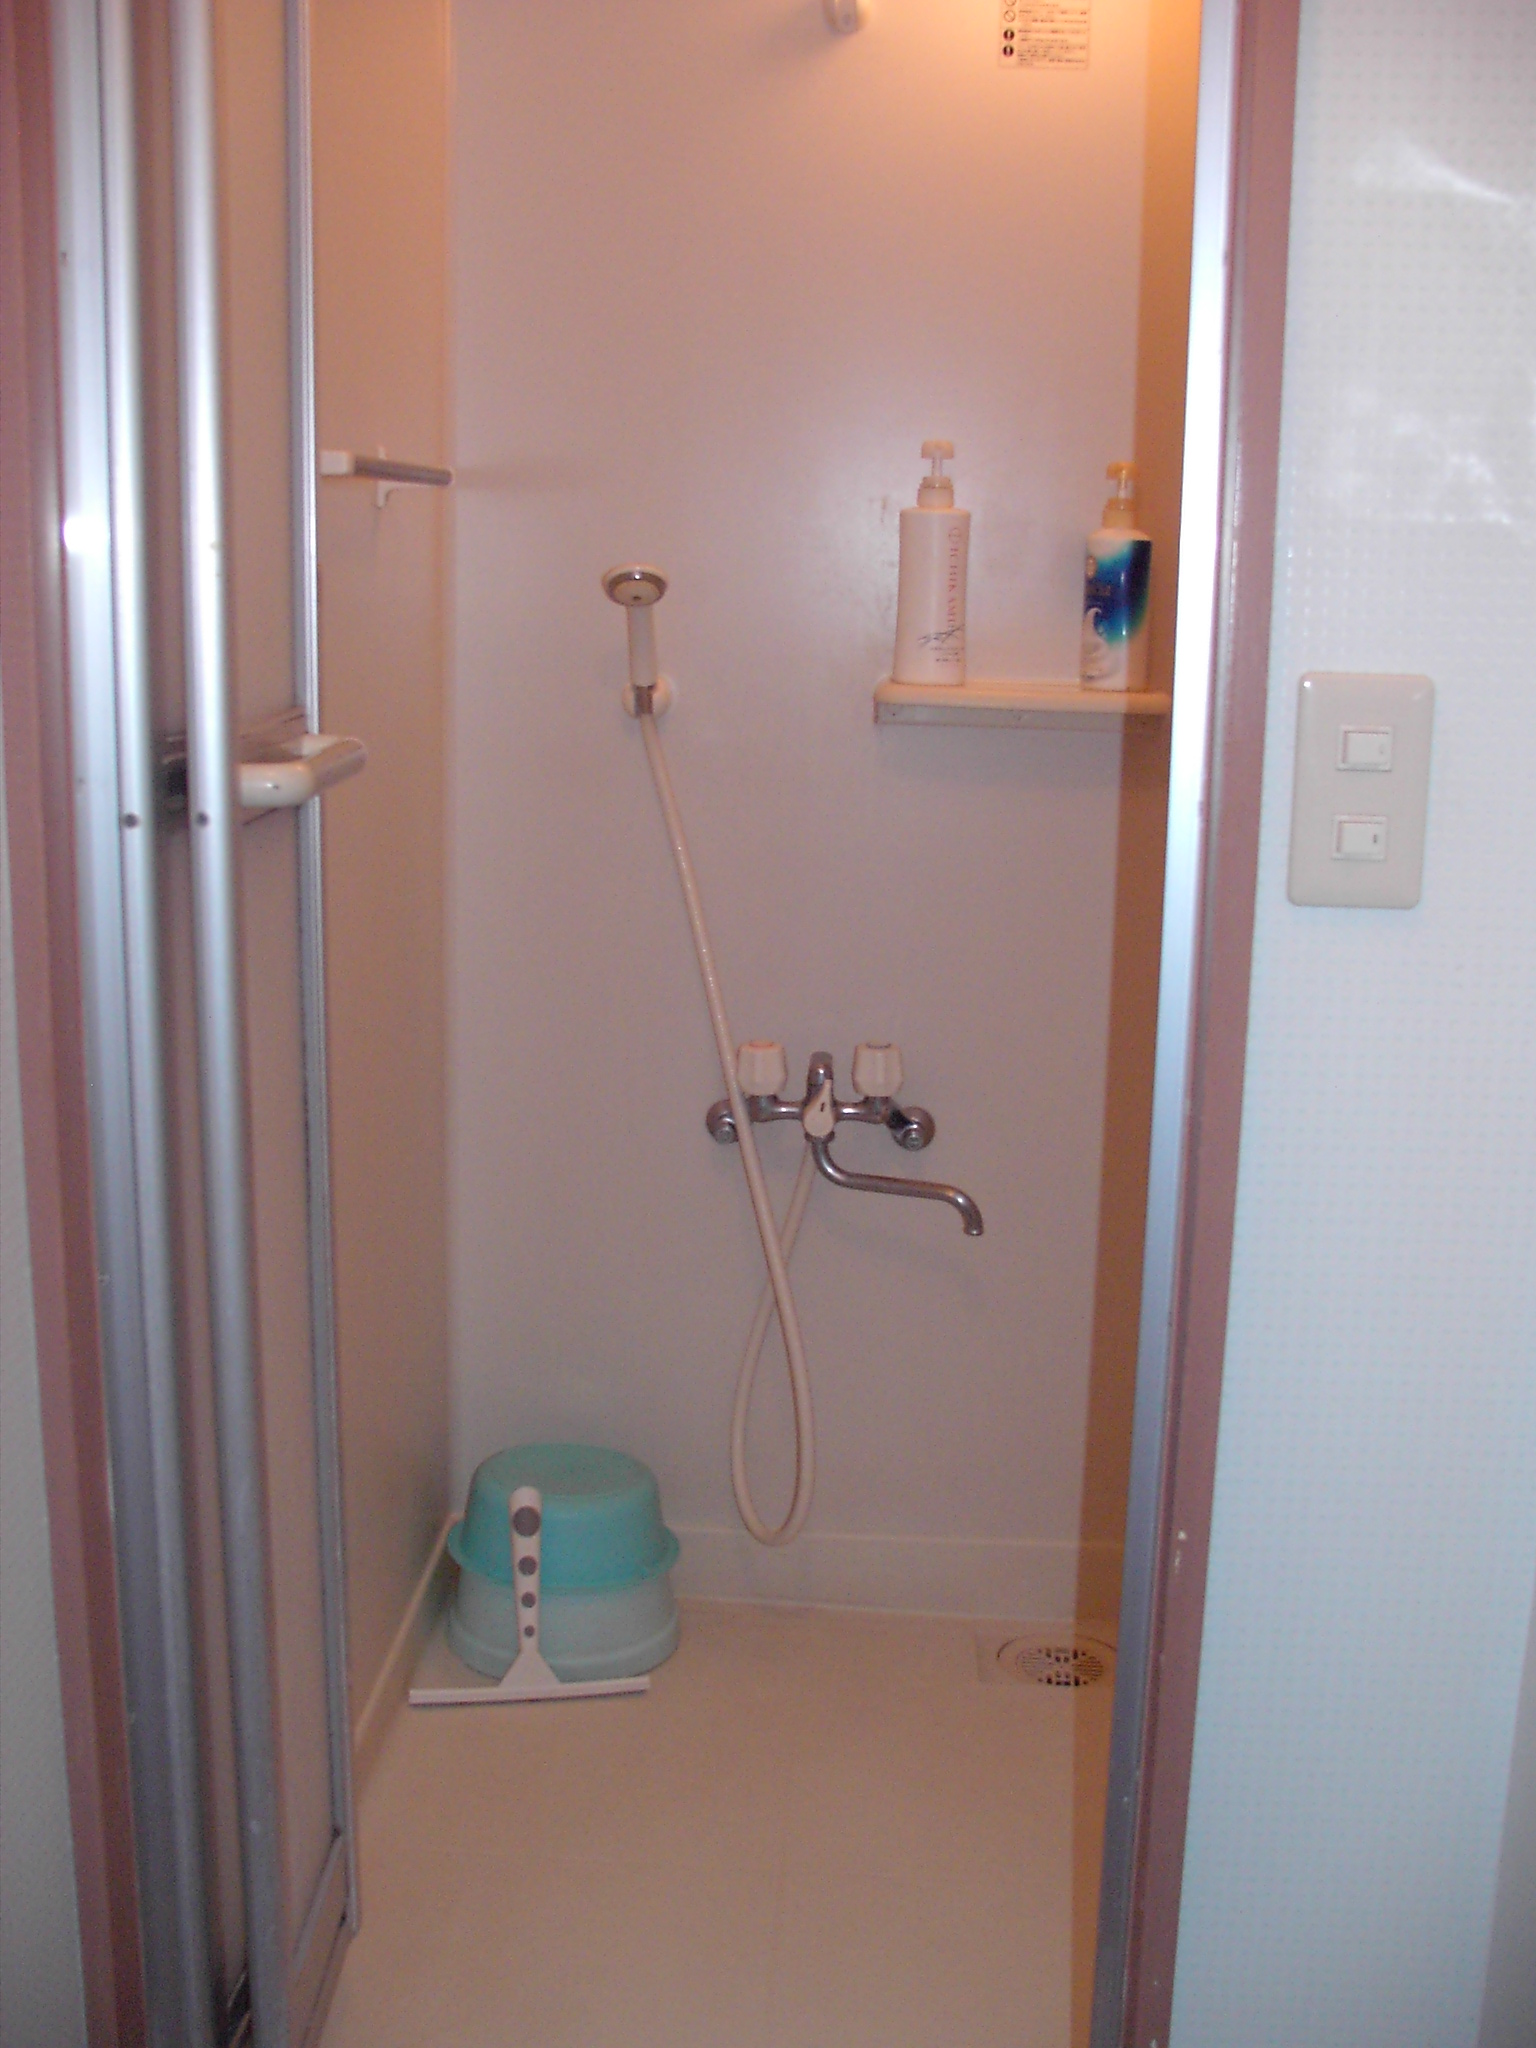 Bath. Separate shared shower room (two locations installed)